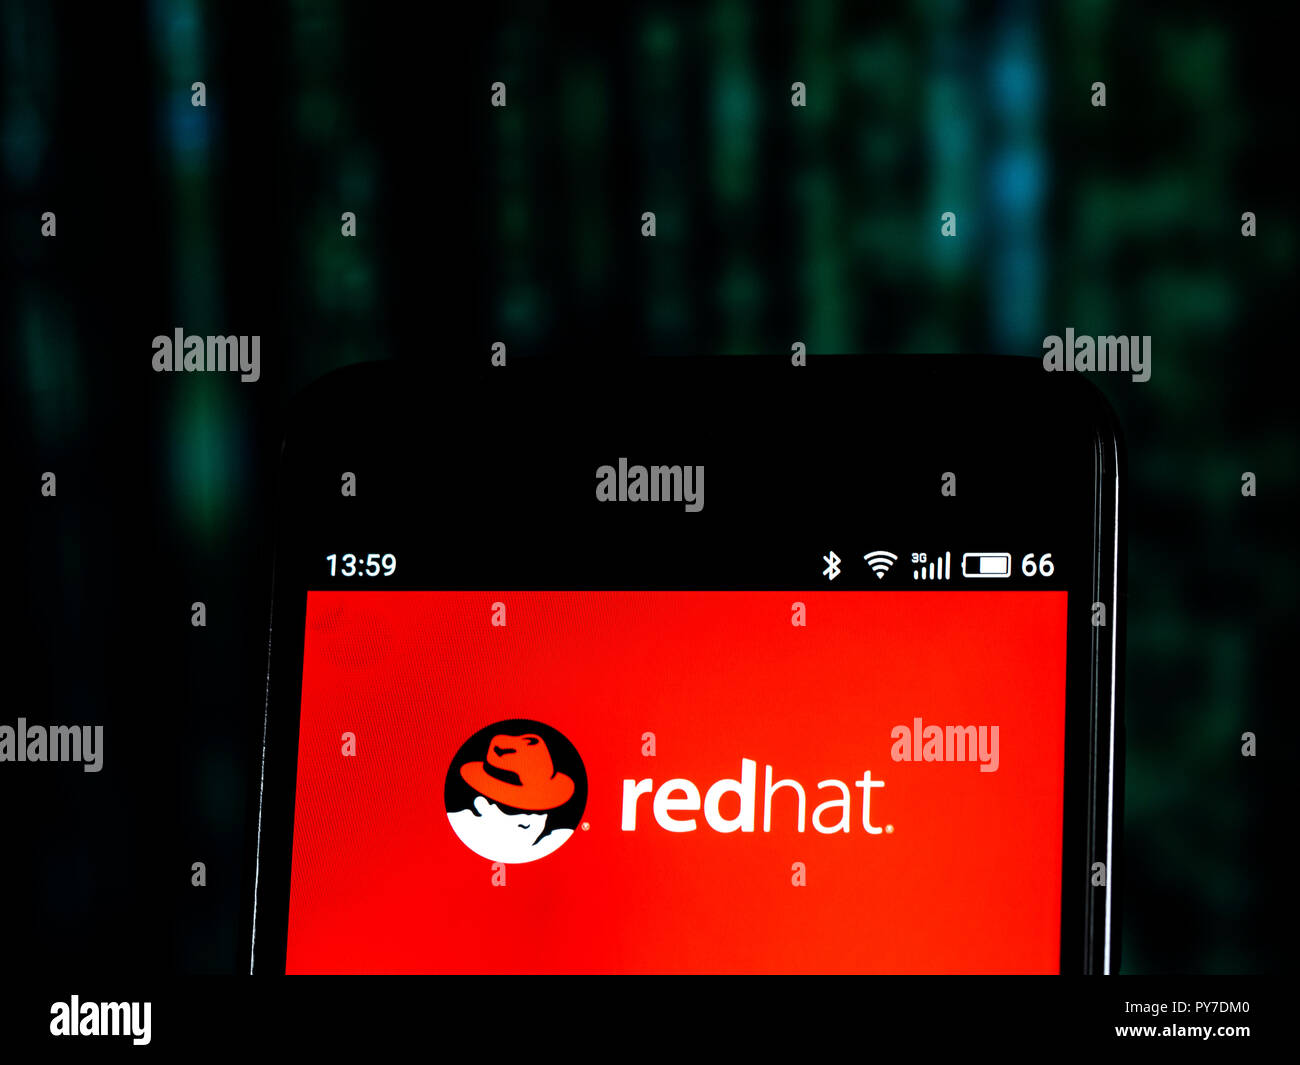 Red Hat  Software company logo seen displayed on smart phone. Red Hat, Inc. is an American multinational software company providing open-source software products to the enterprise community. Stock Photo